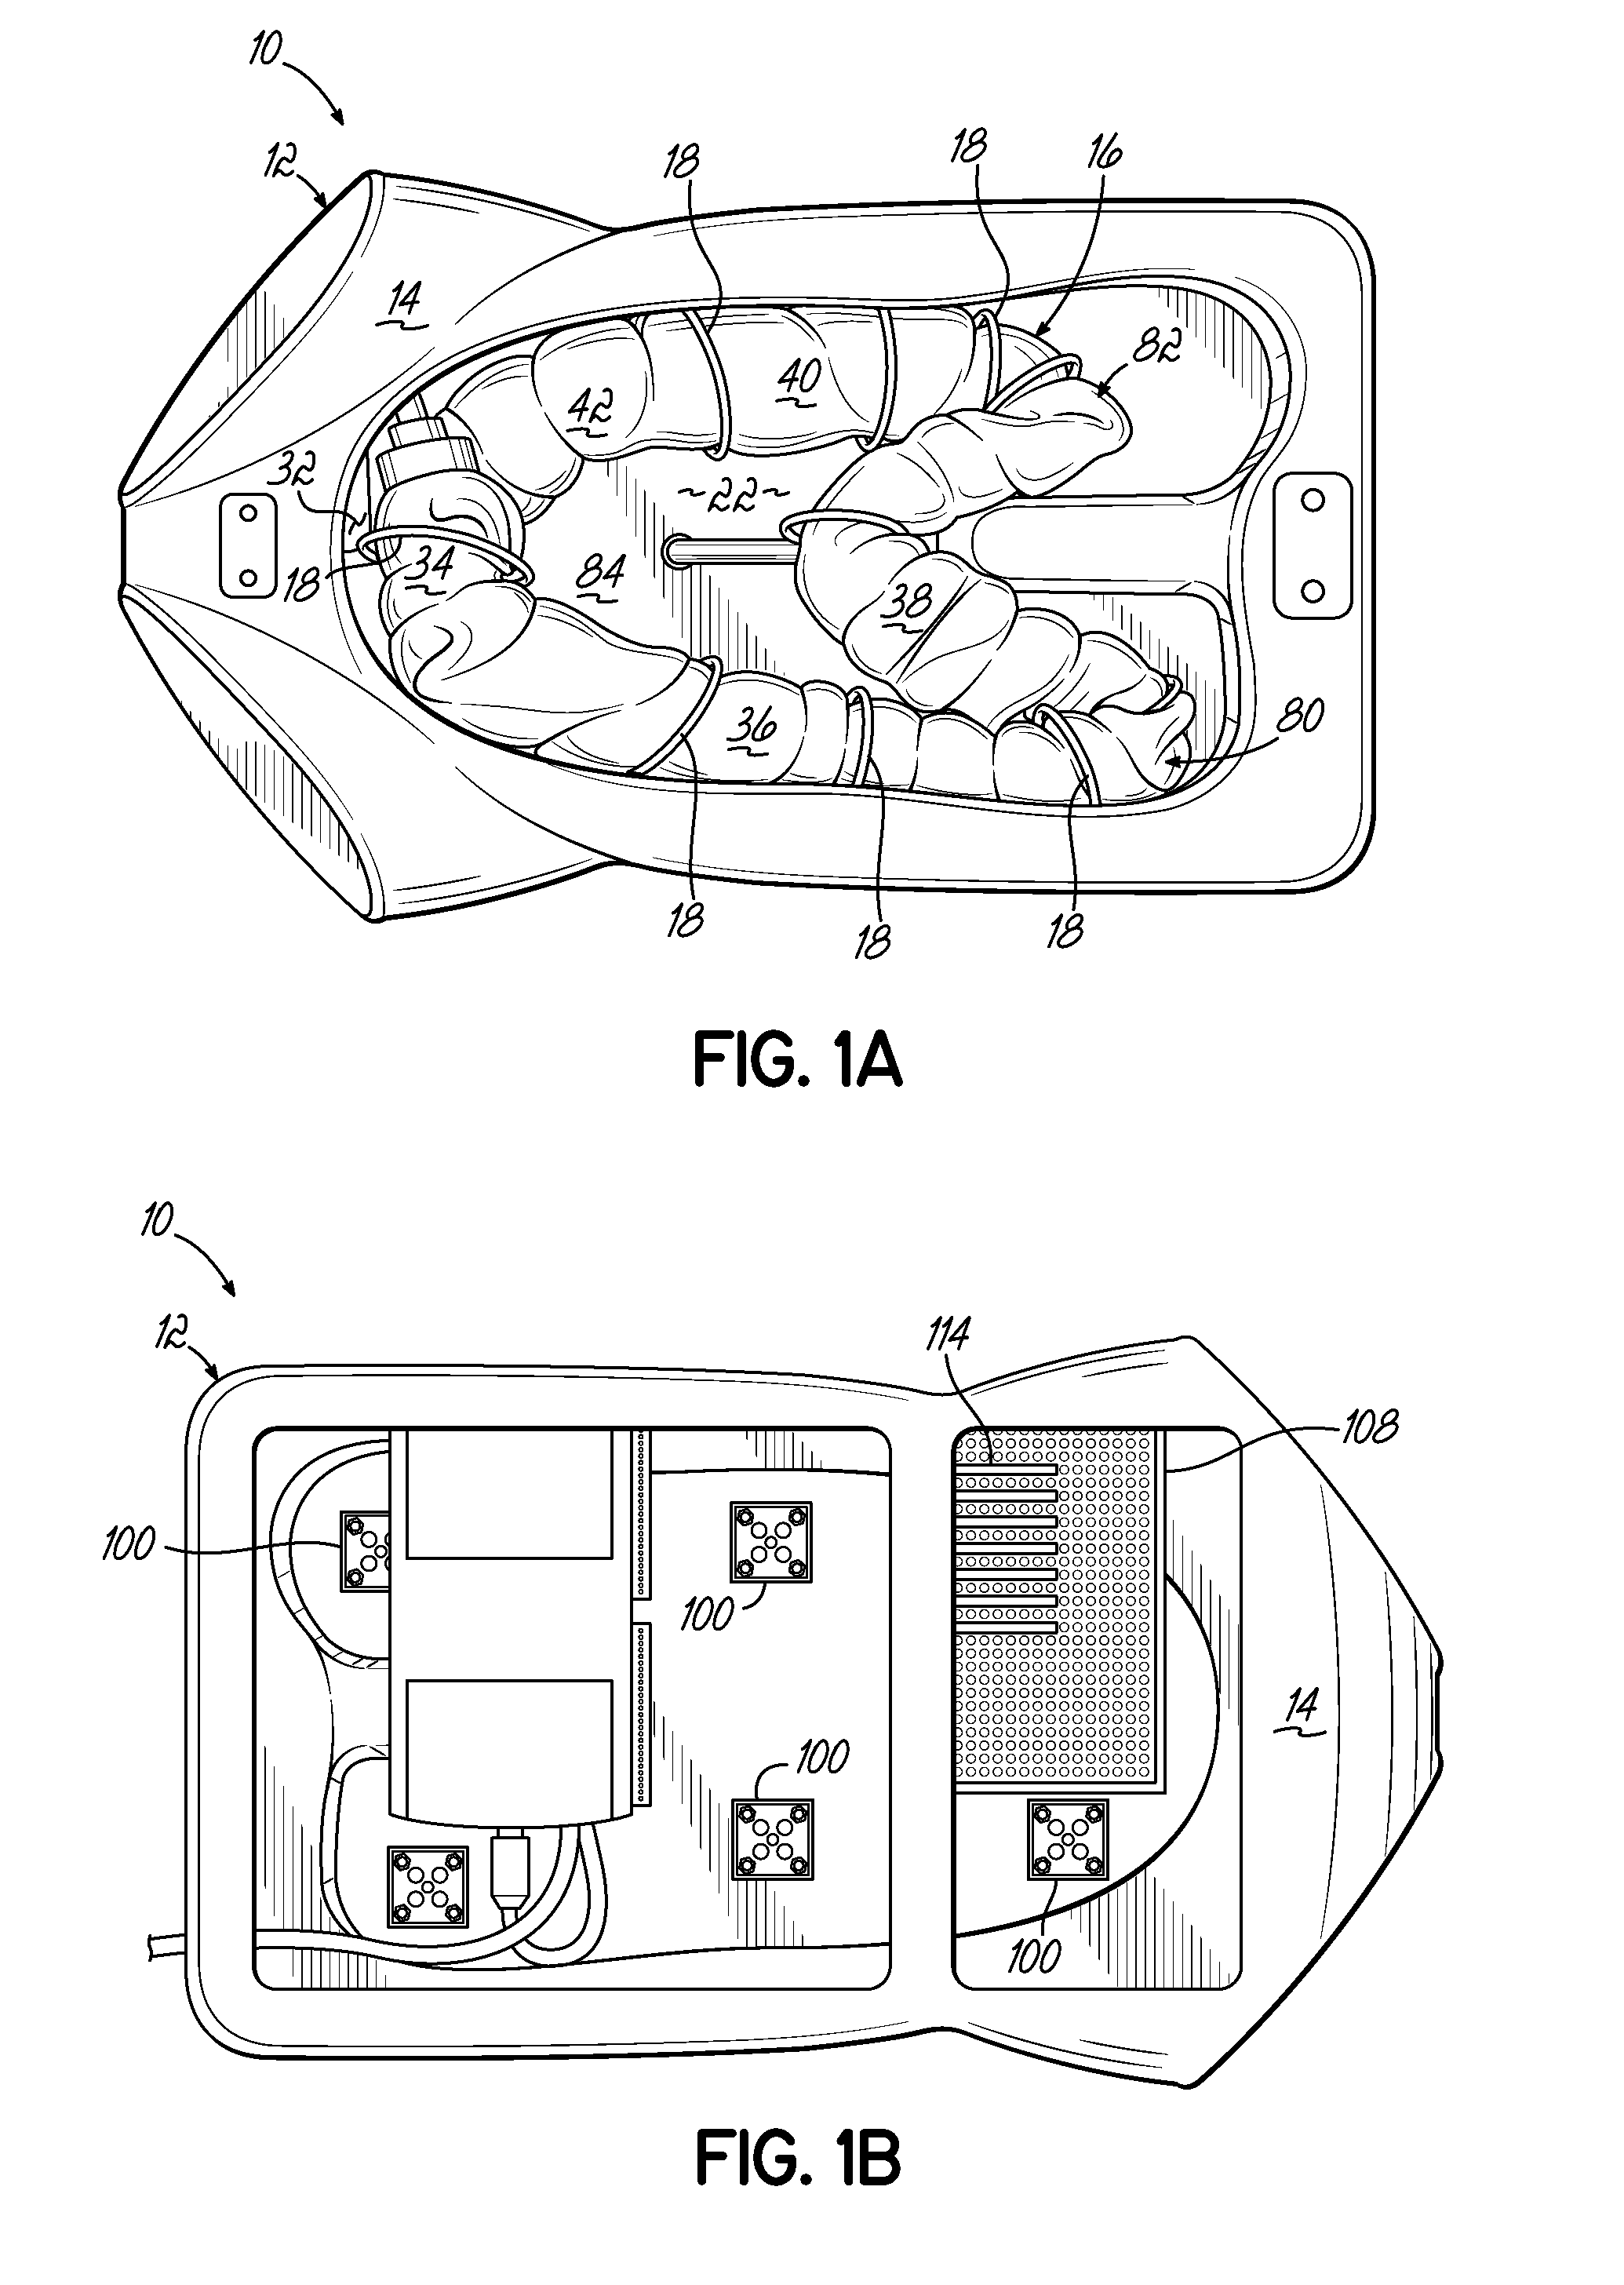 Active colonoscopy training model and method of using the same